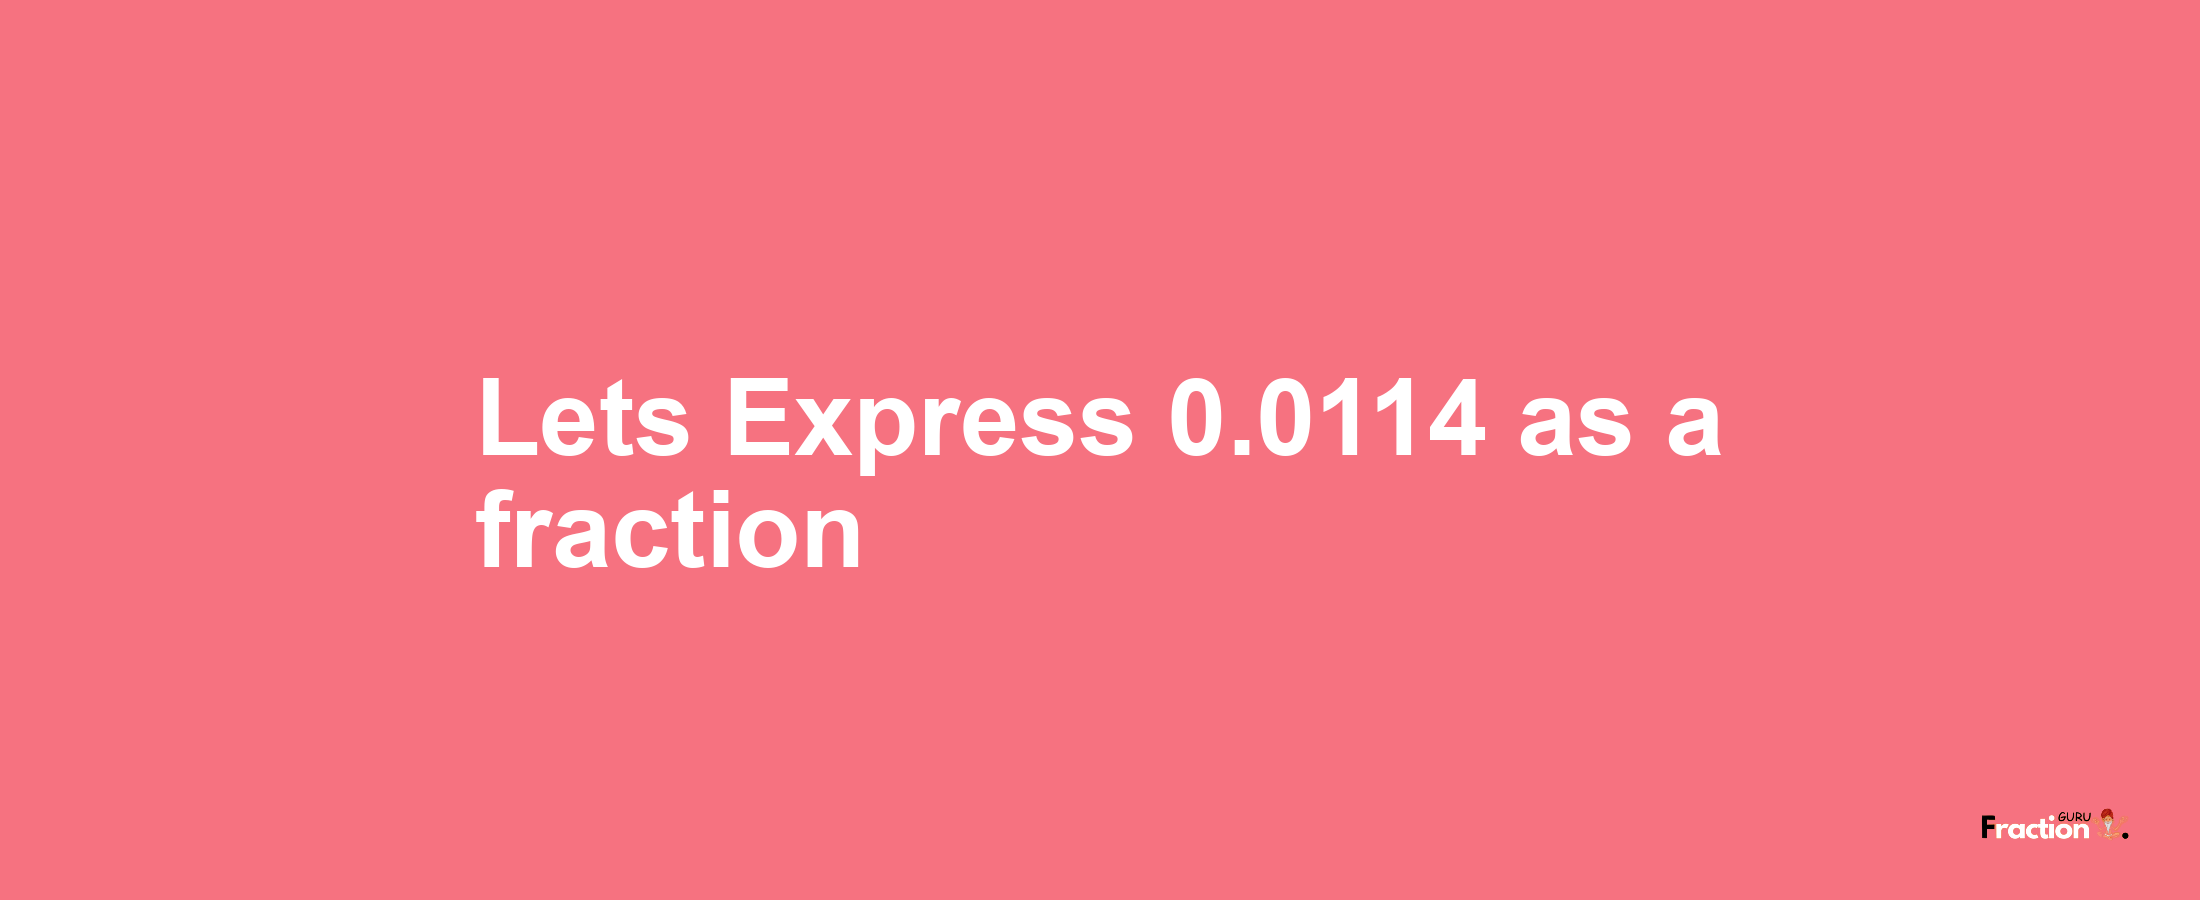 Lets Express 0.0114 as afraction